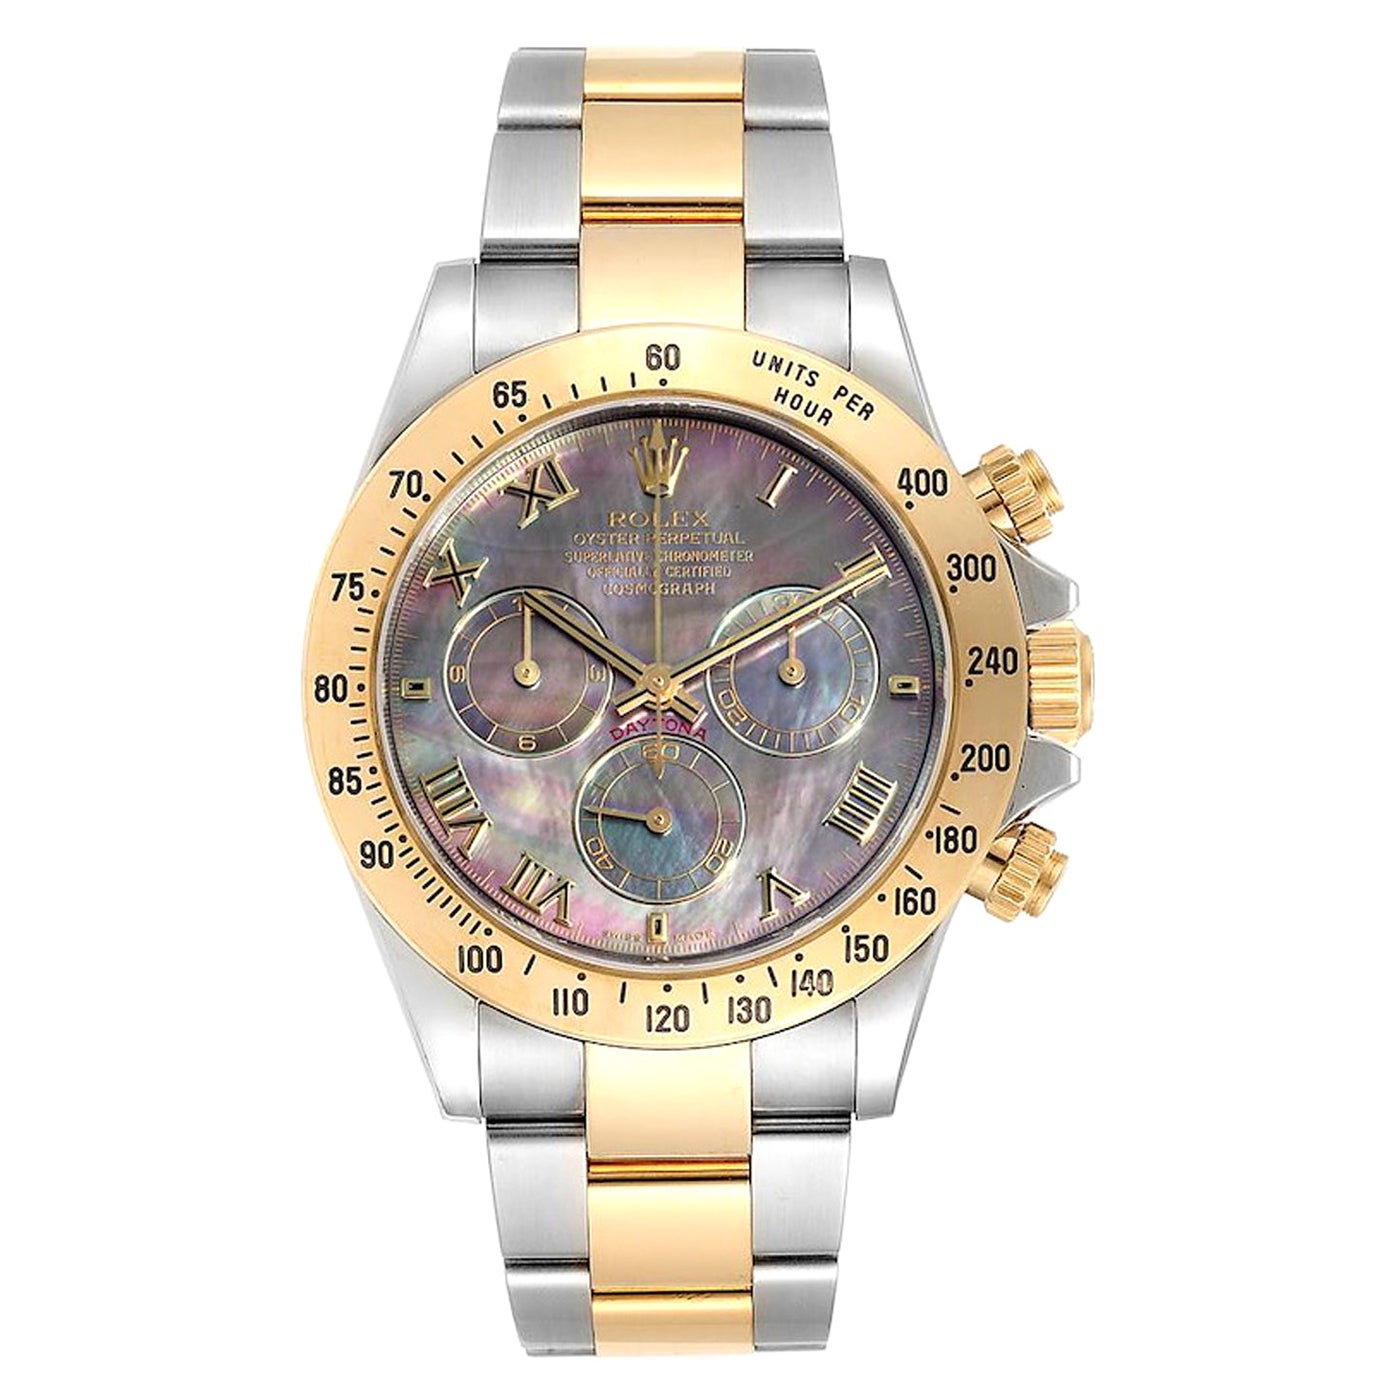 Rolex Daytona 116523 Stainless Steel 18k Yellow Gold Black Mother of Pearl Dial